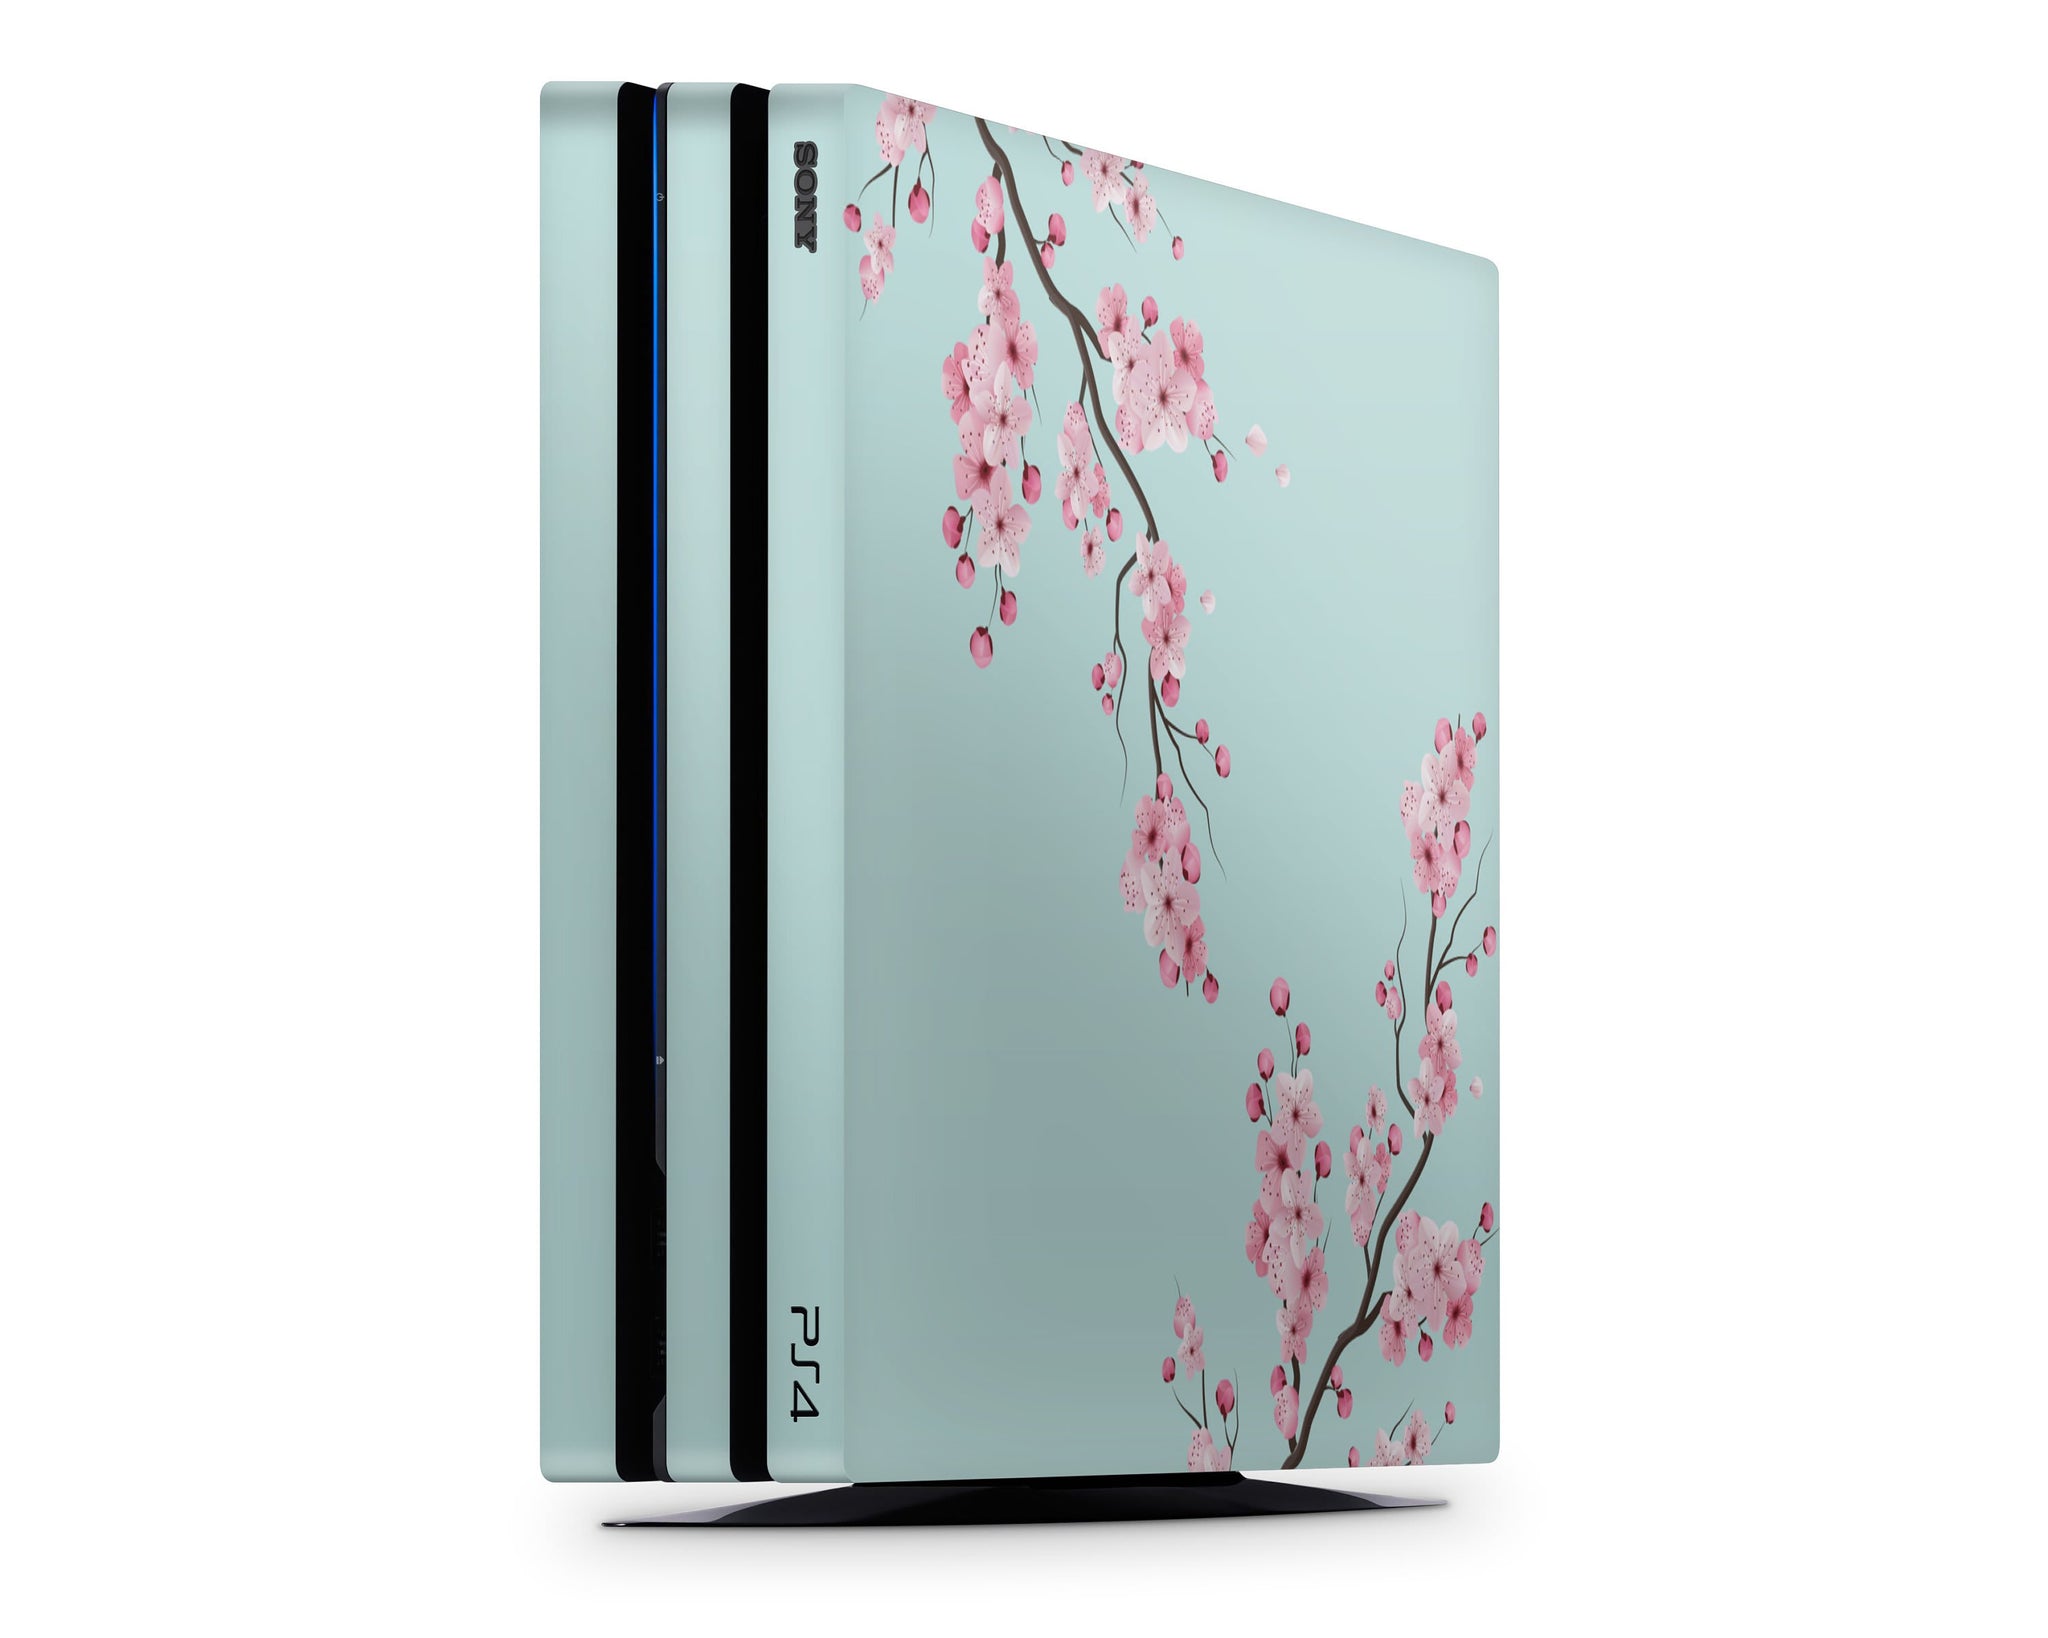 Cherry Blossom Teal PS4 Skin